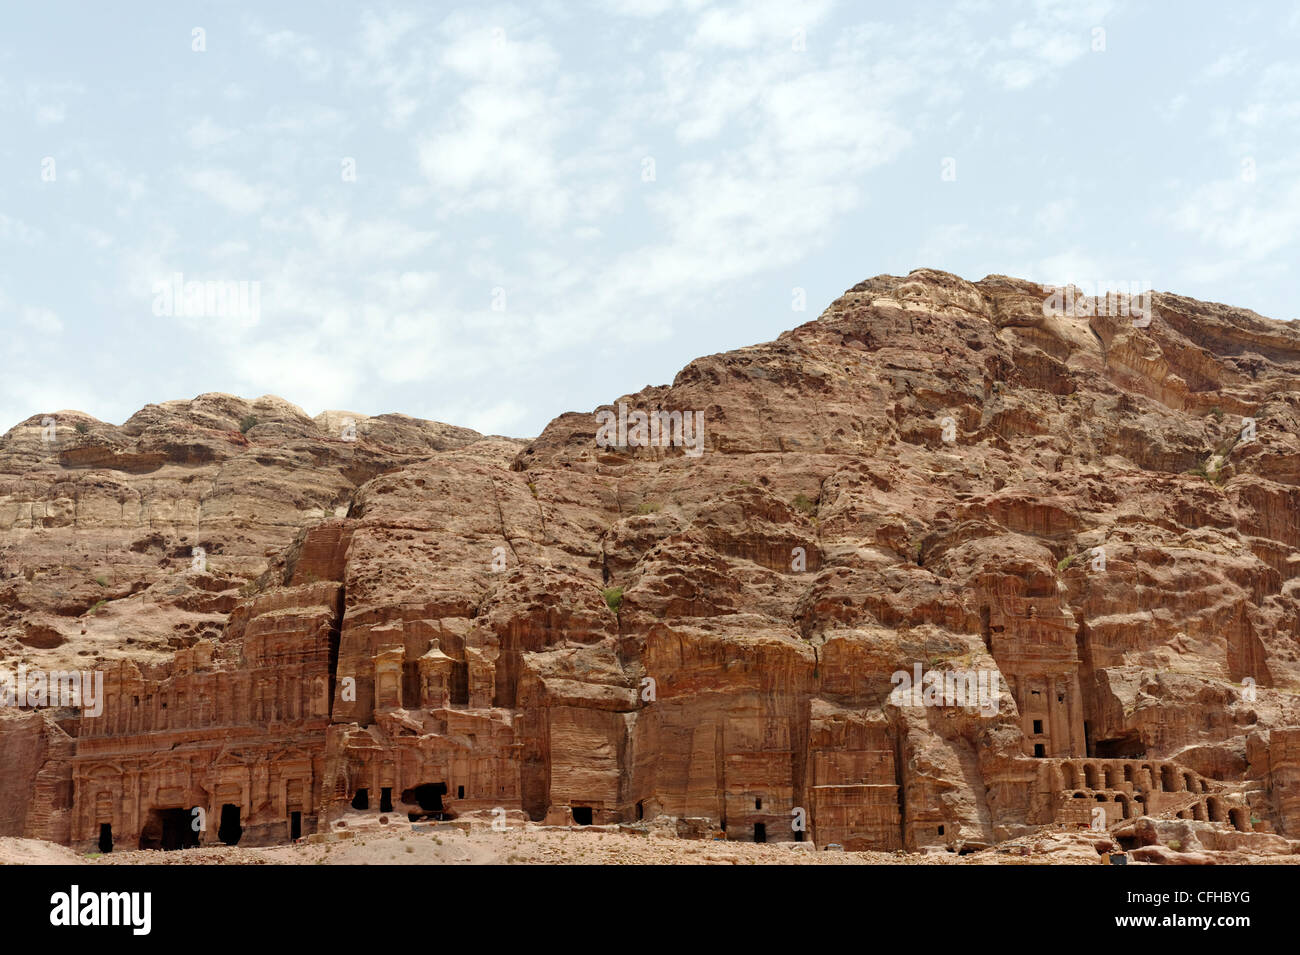 Petra. Jordan. View of the monumental Royal tombs which are carved into the East Cliff or El-Khubtha mountain of Petra. The Stock Photo